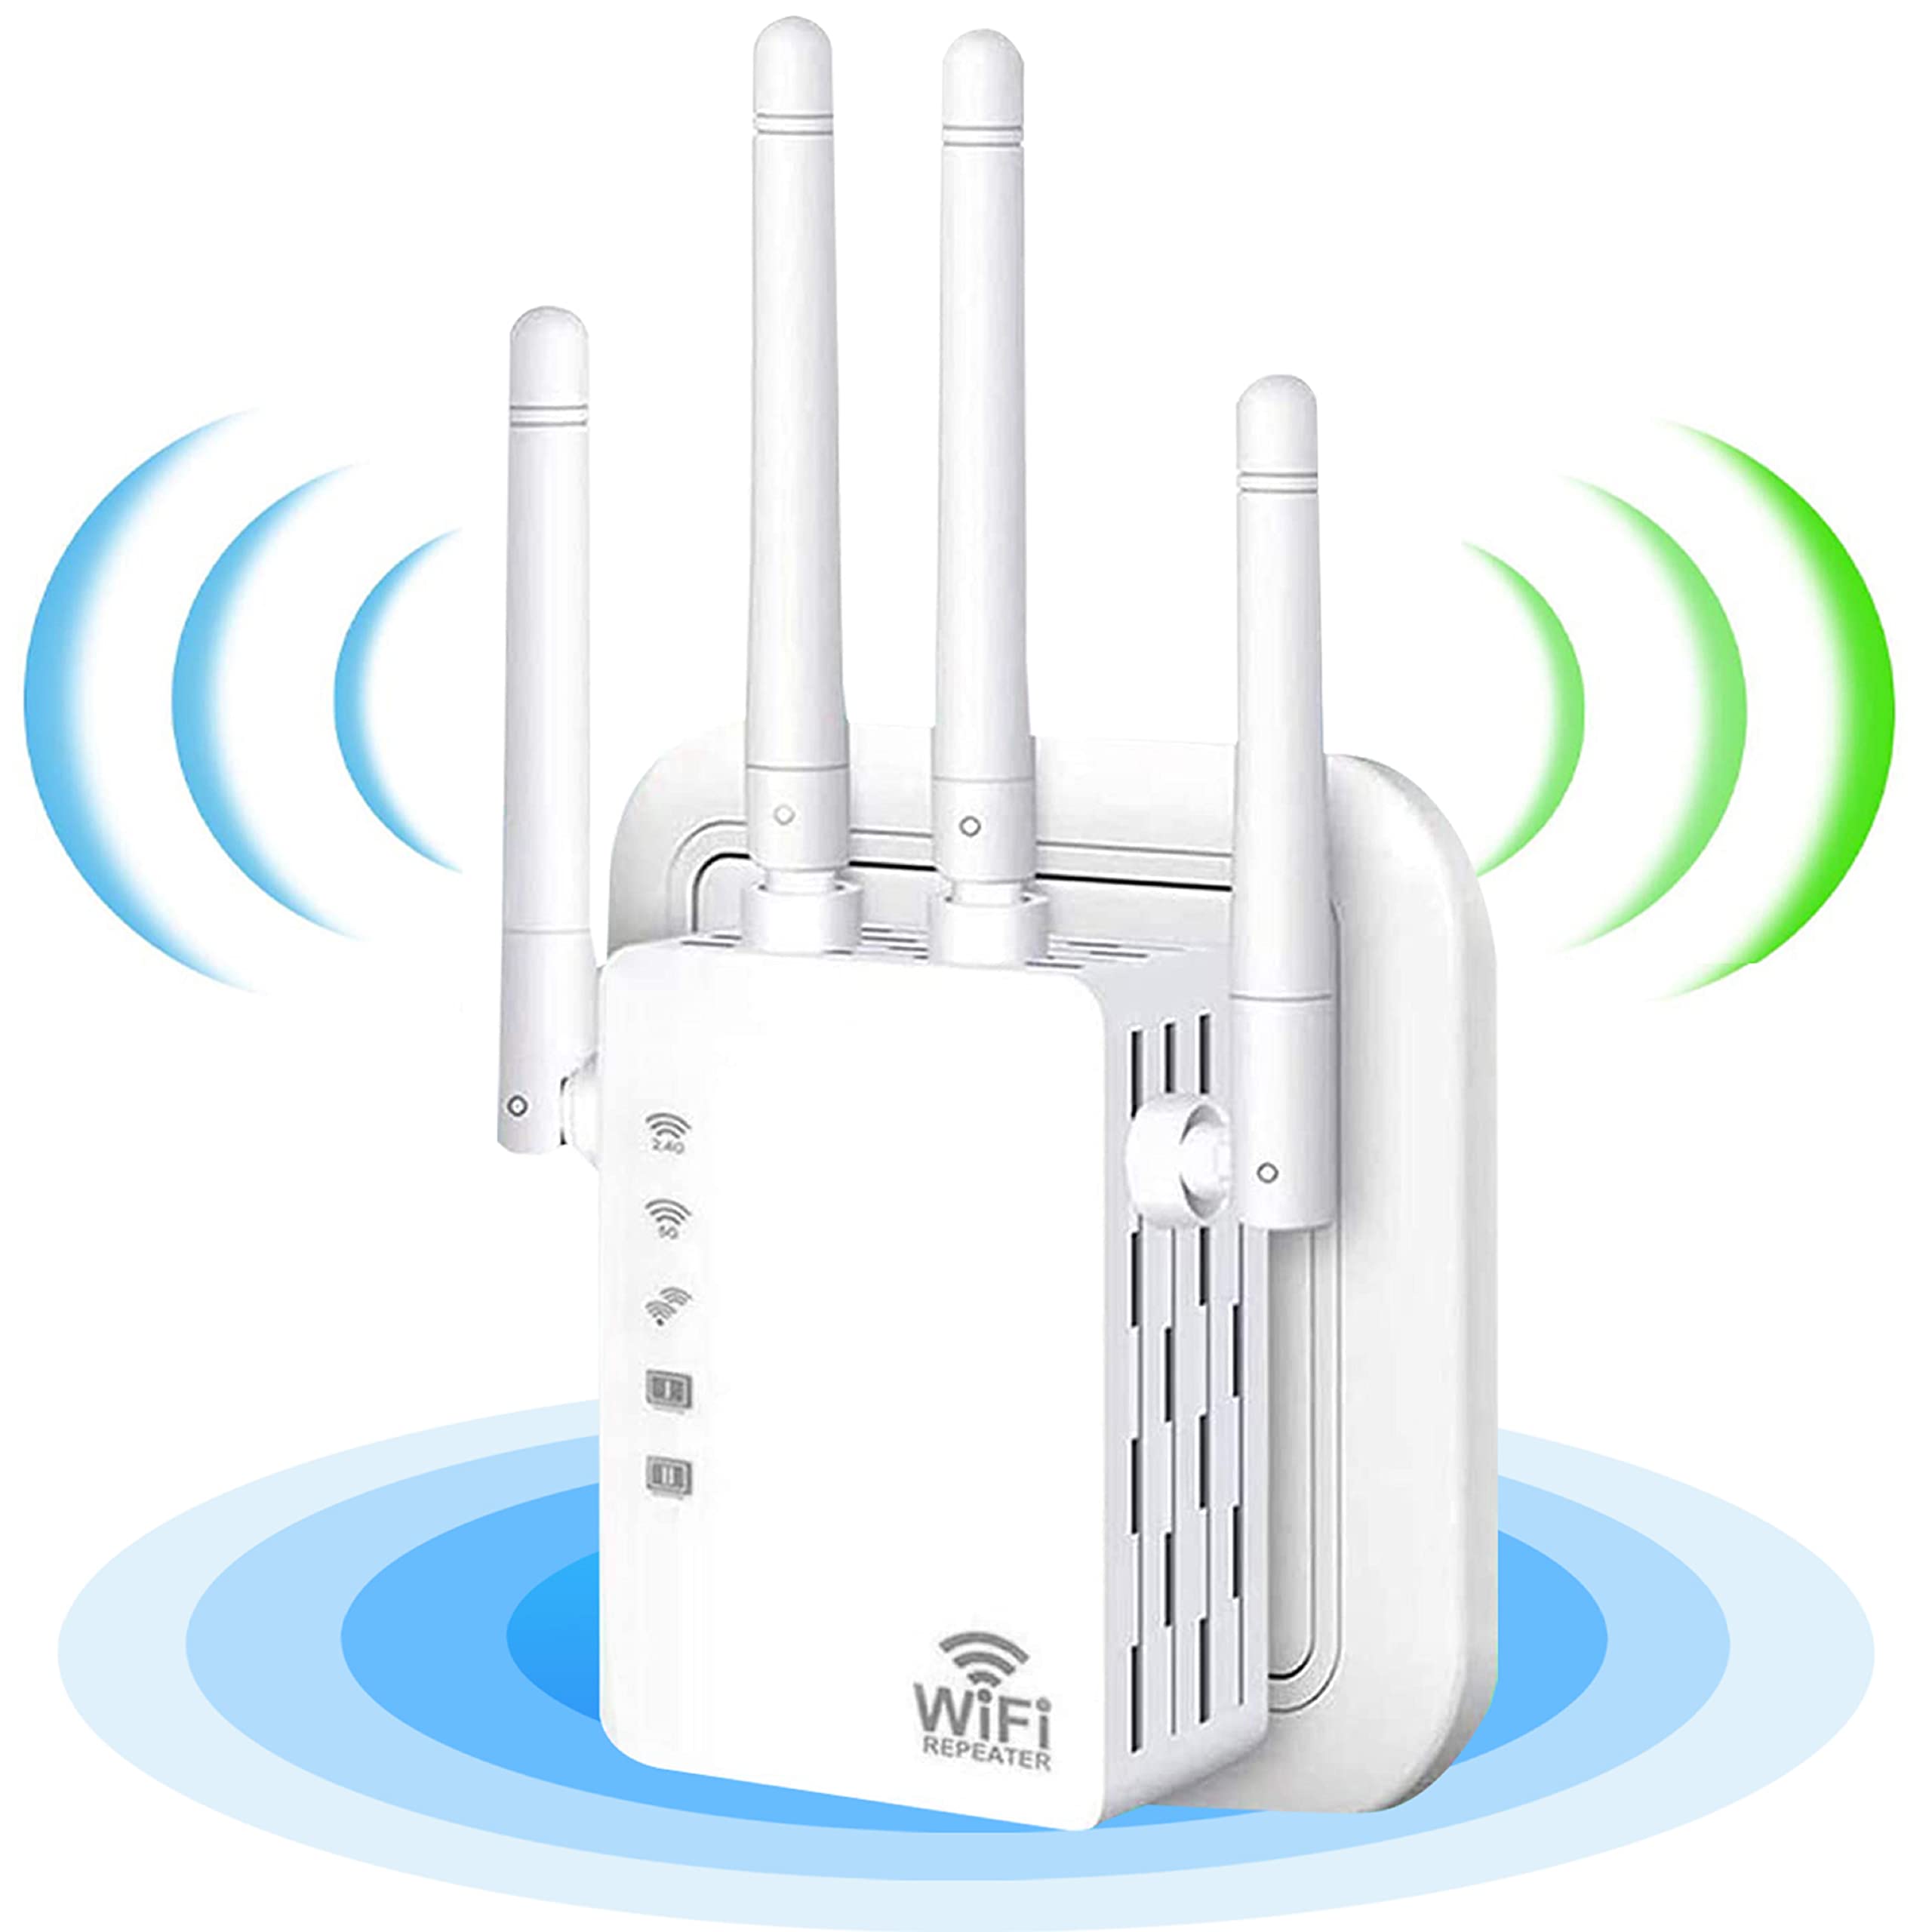 Identify areas with weak Wi-Fi signal
Purchase a Wi-Fi extender compatible with your router